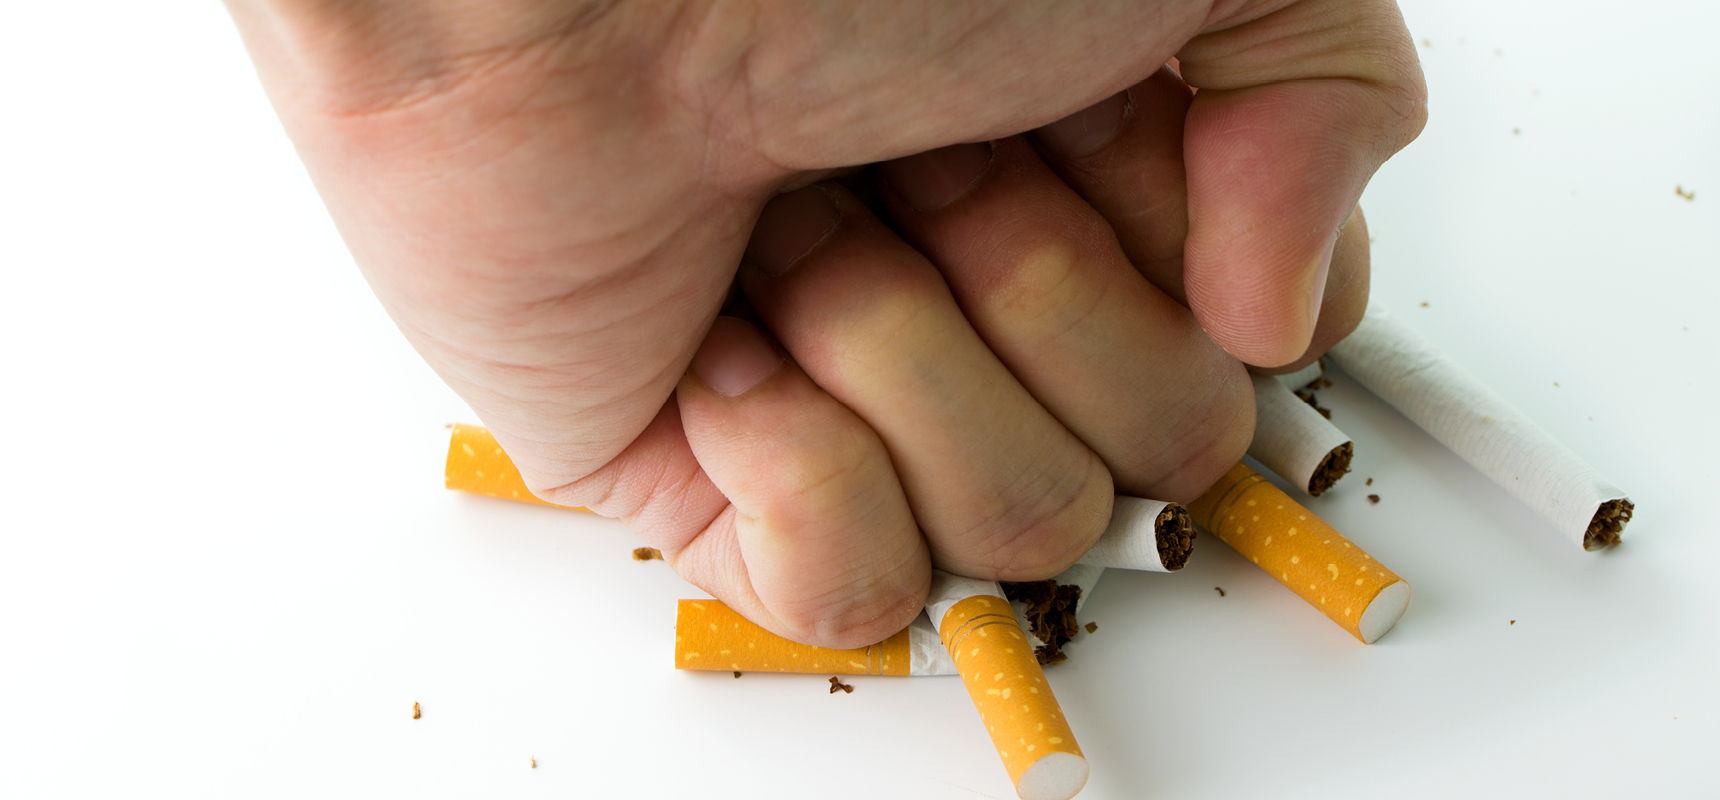 Balled fist punching down on pile of cigarettes signifying quitting smoking